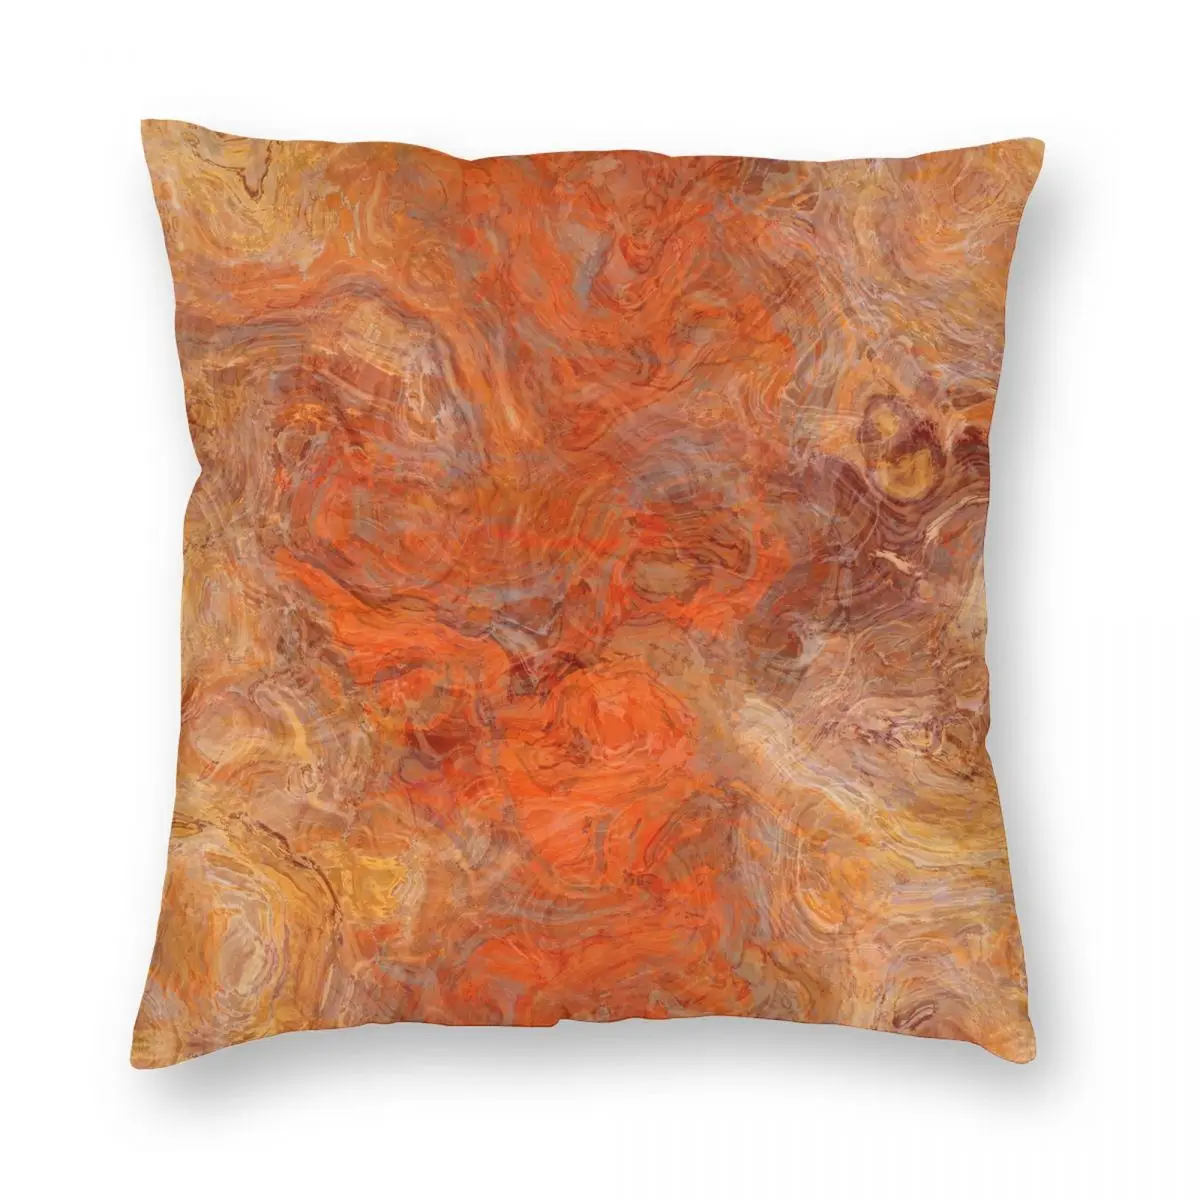 

Gold And Rust Swirl Square Pillowcase Polyester Linen Velvet Pattern Zip Decorative Throw Pillow Case Sofa Seater Cushion Cover